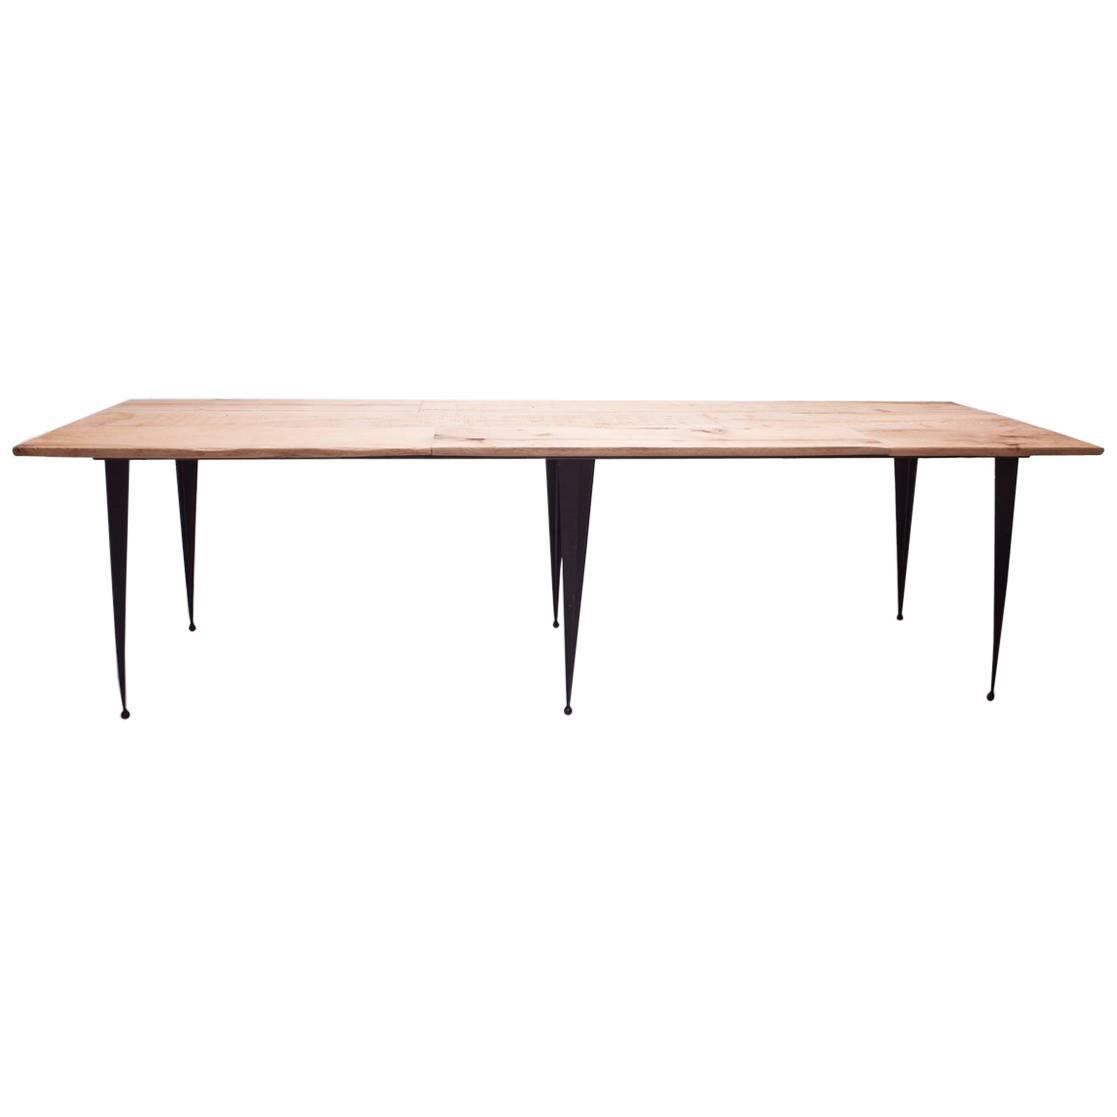 Made to Order Reclaimed Oak Top Table with Tapered Black Iron Legs